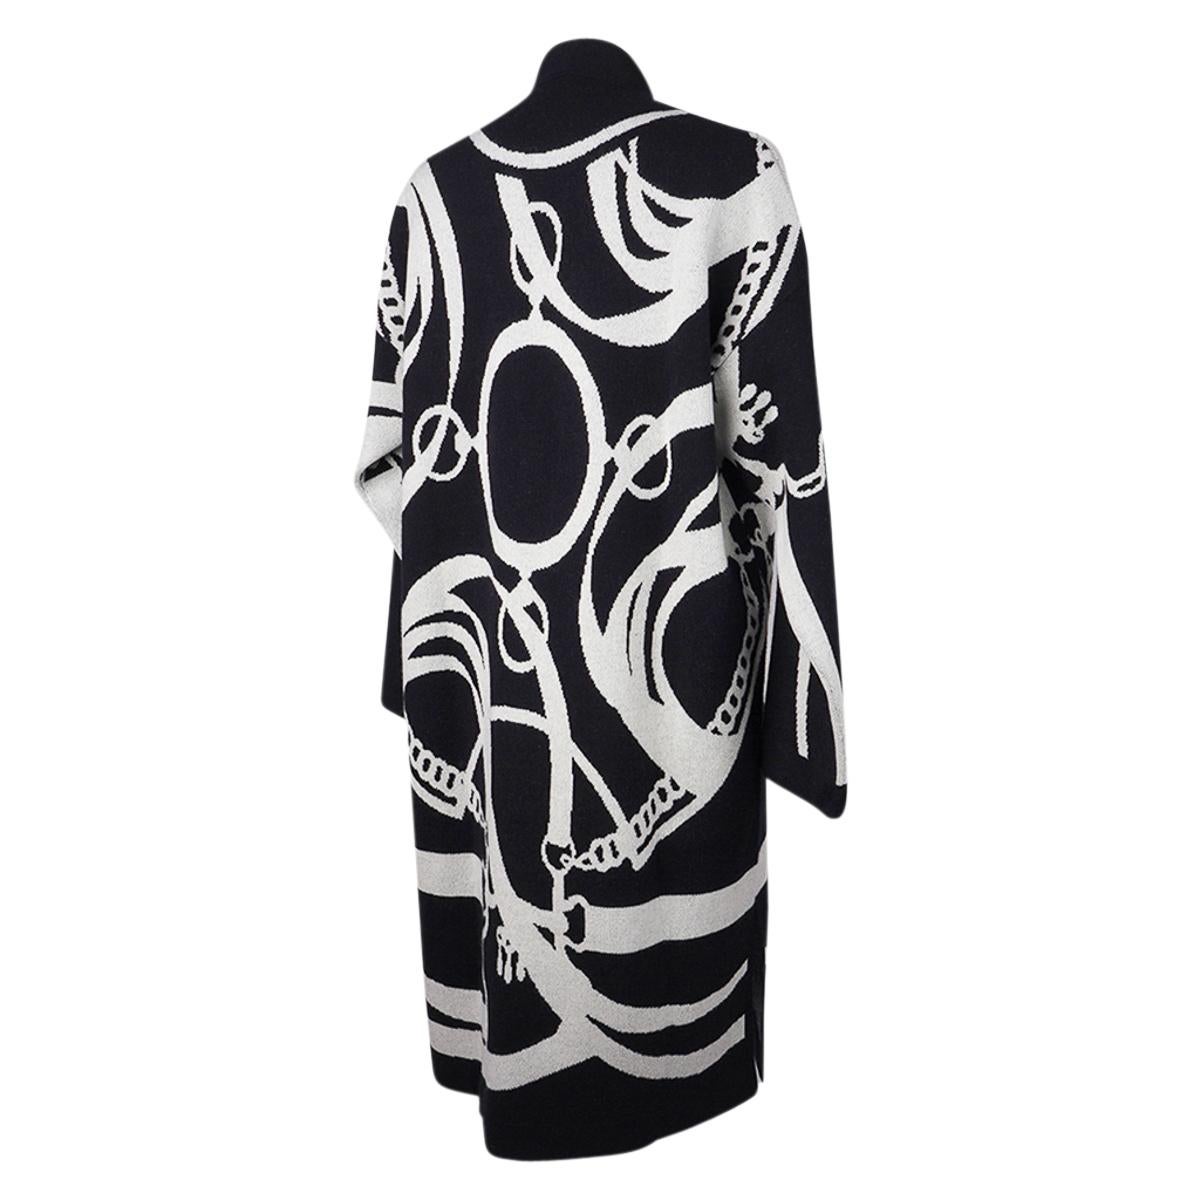 Mightychic offers an Hermes Promenade du Matin over sized long cardigan coat featured in Black and White.
Drop shoulder long cardigan coat has a jacquard knit with Promenade du Matin intarsia motif.
V-neck with one tone on tone corozo button midway